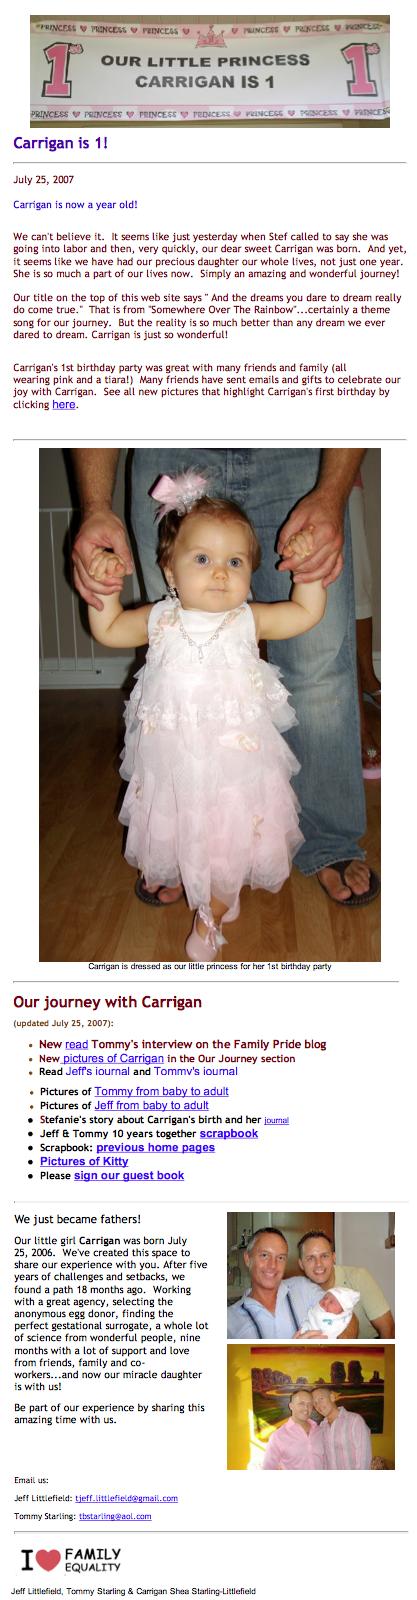 July 25, 2007 Carrigan is 1 year old